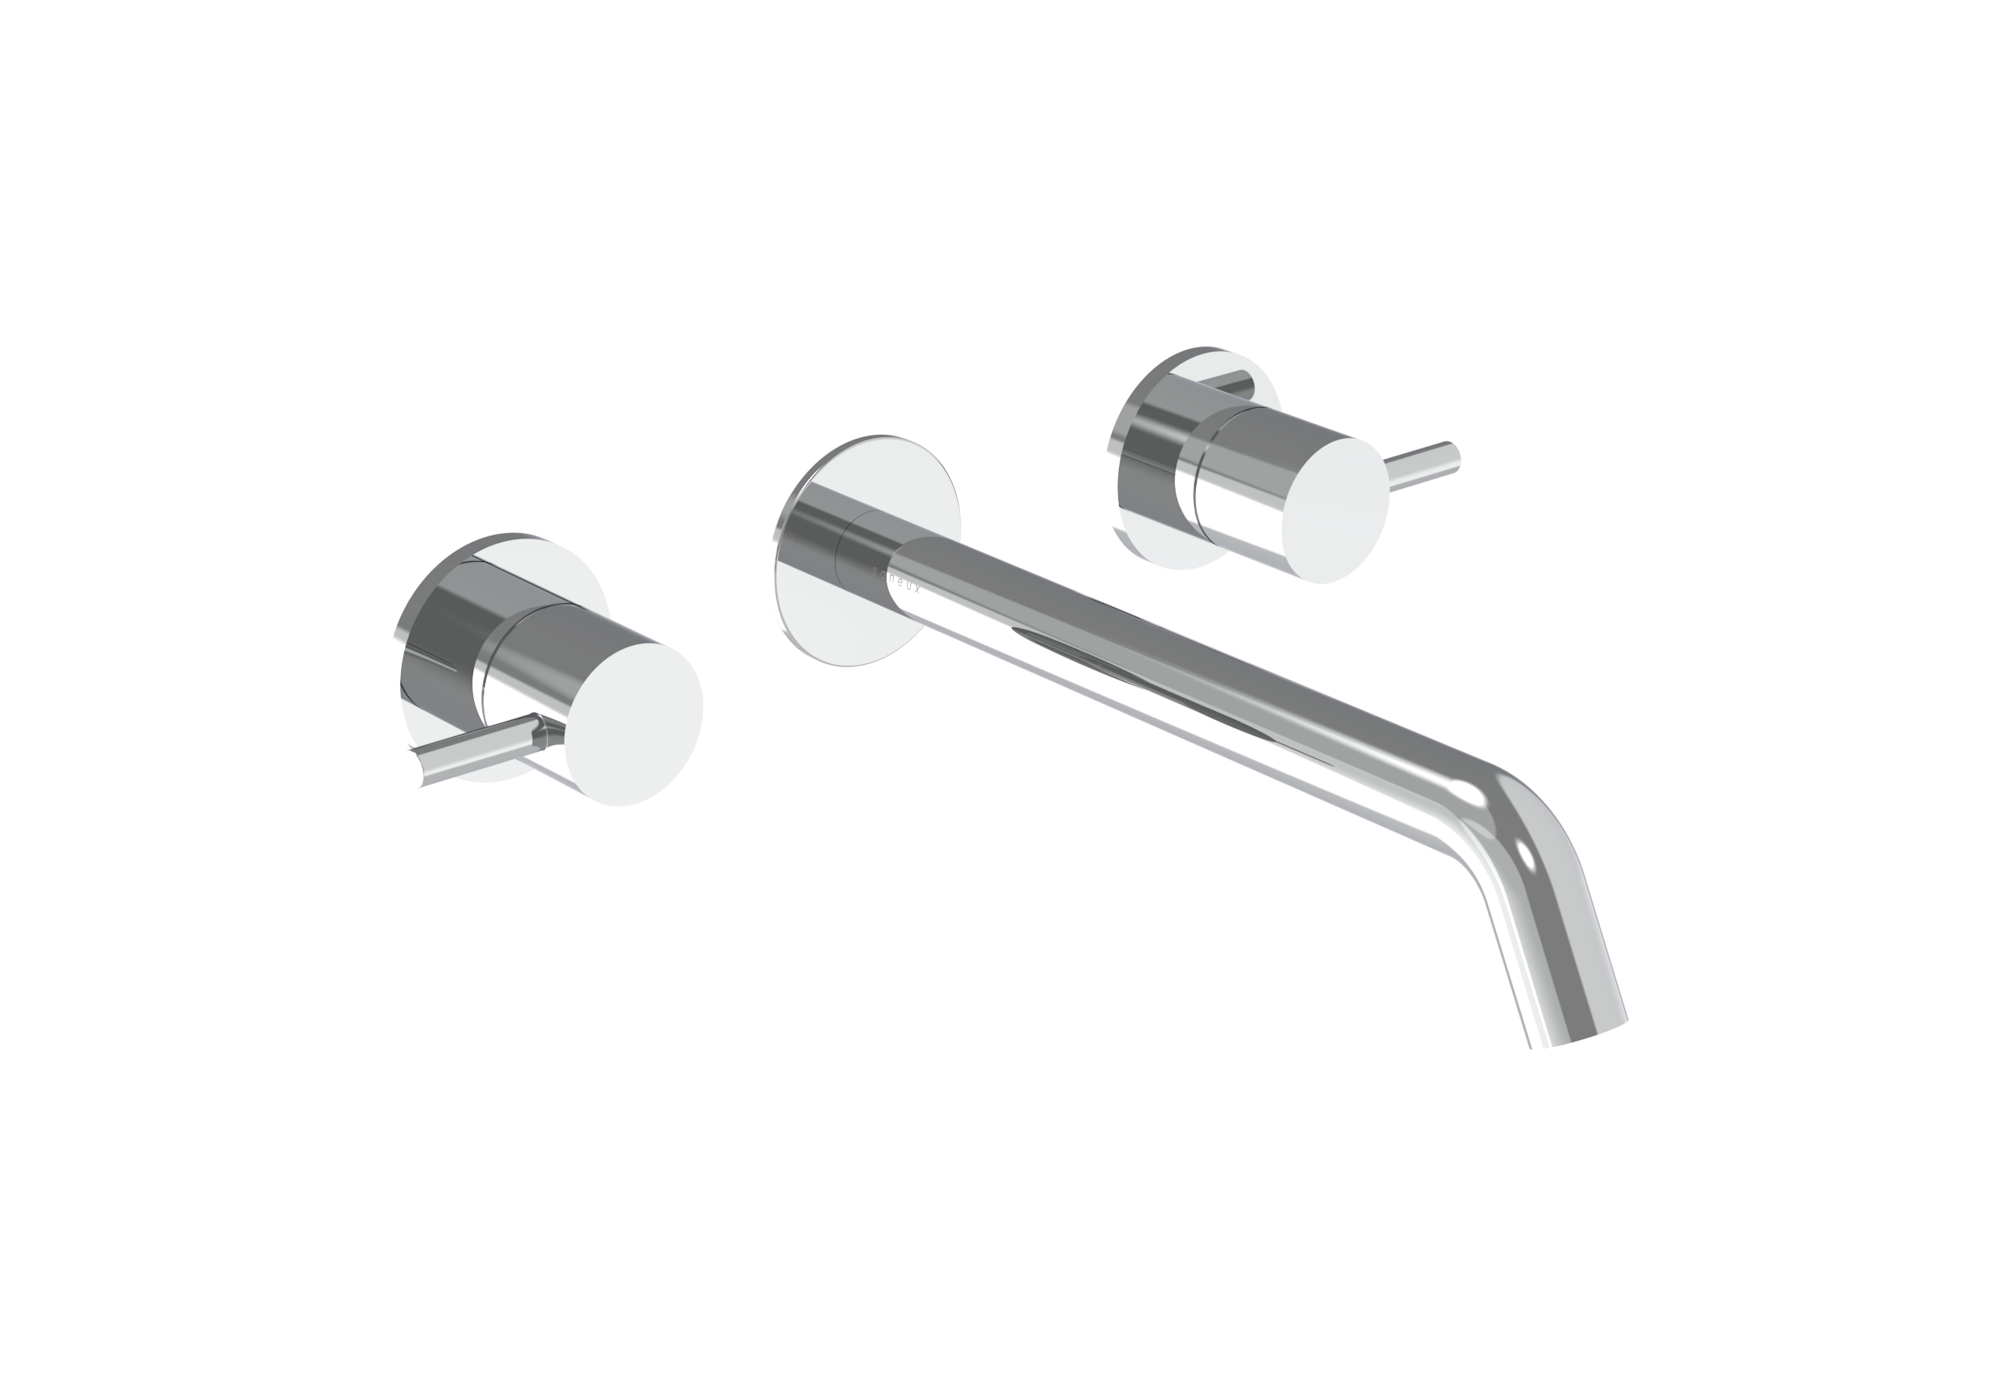 COS 3 Tap Hole Wall mounted KIT - w/ Long spout (220mm) w/ Classic handle - Chrome